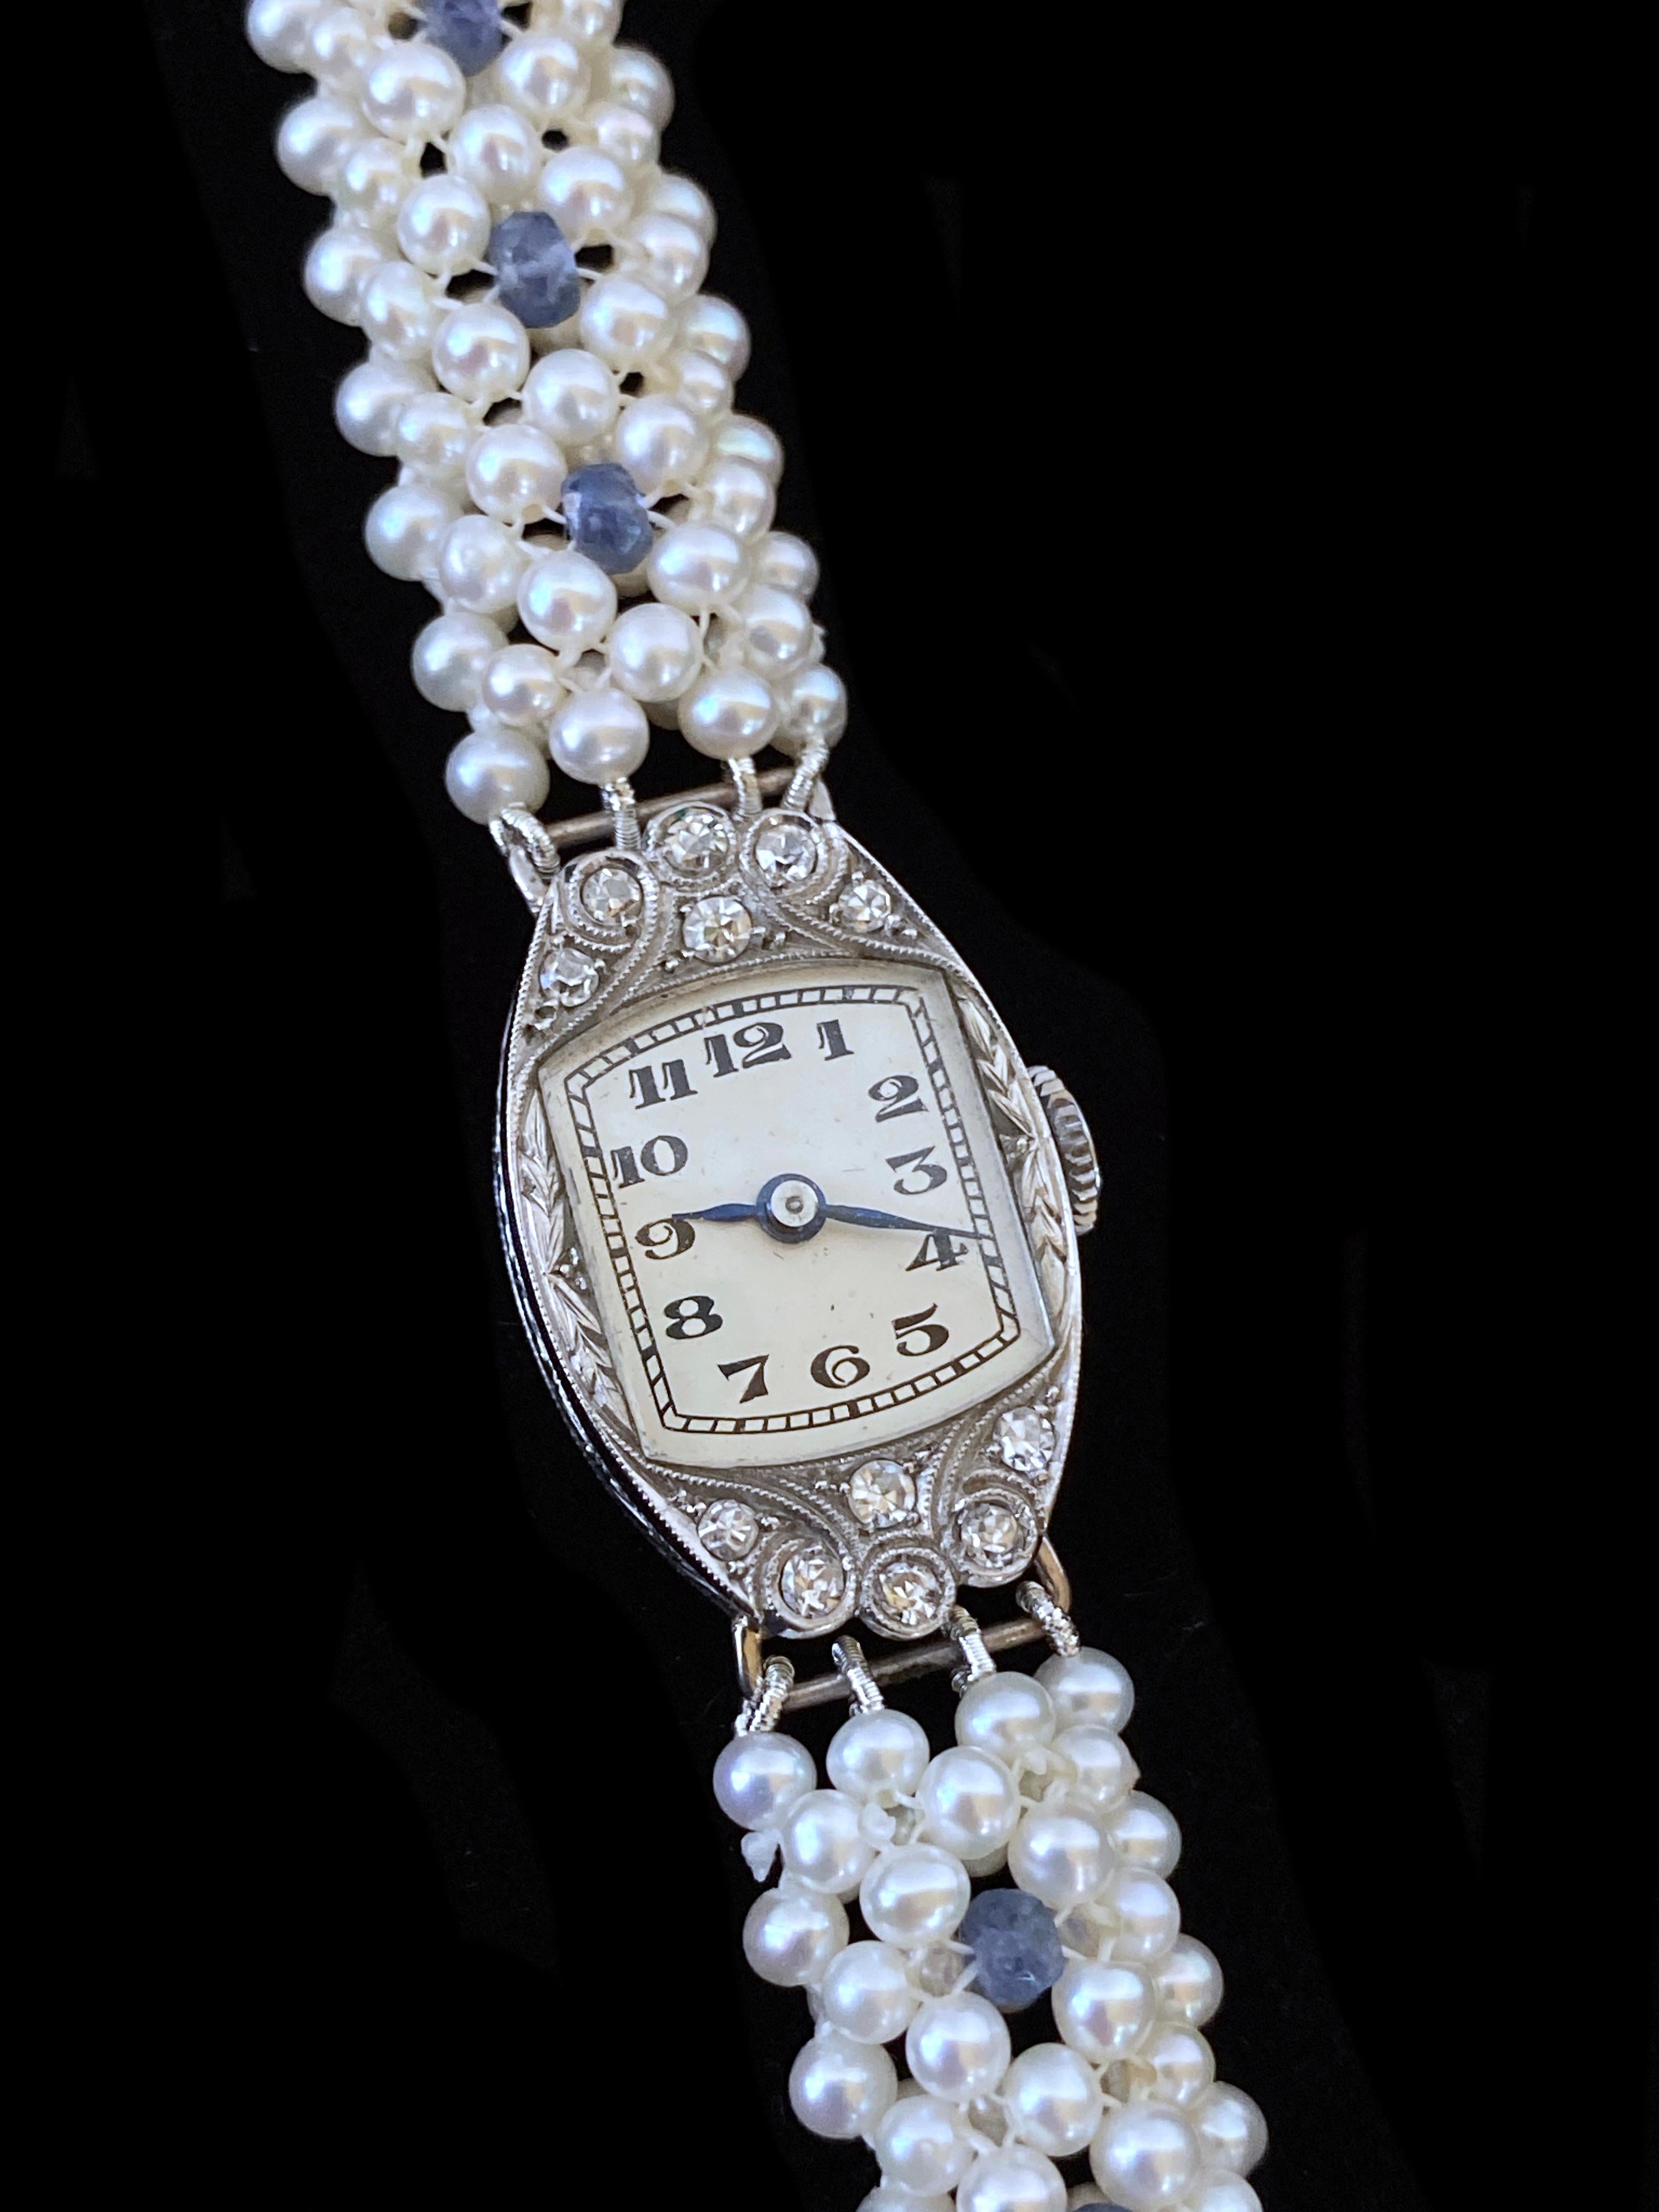 vintage watch with pearls